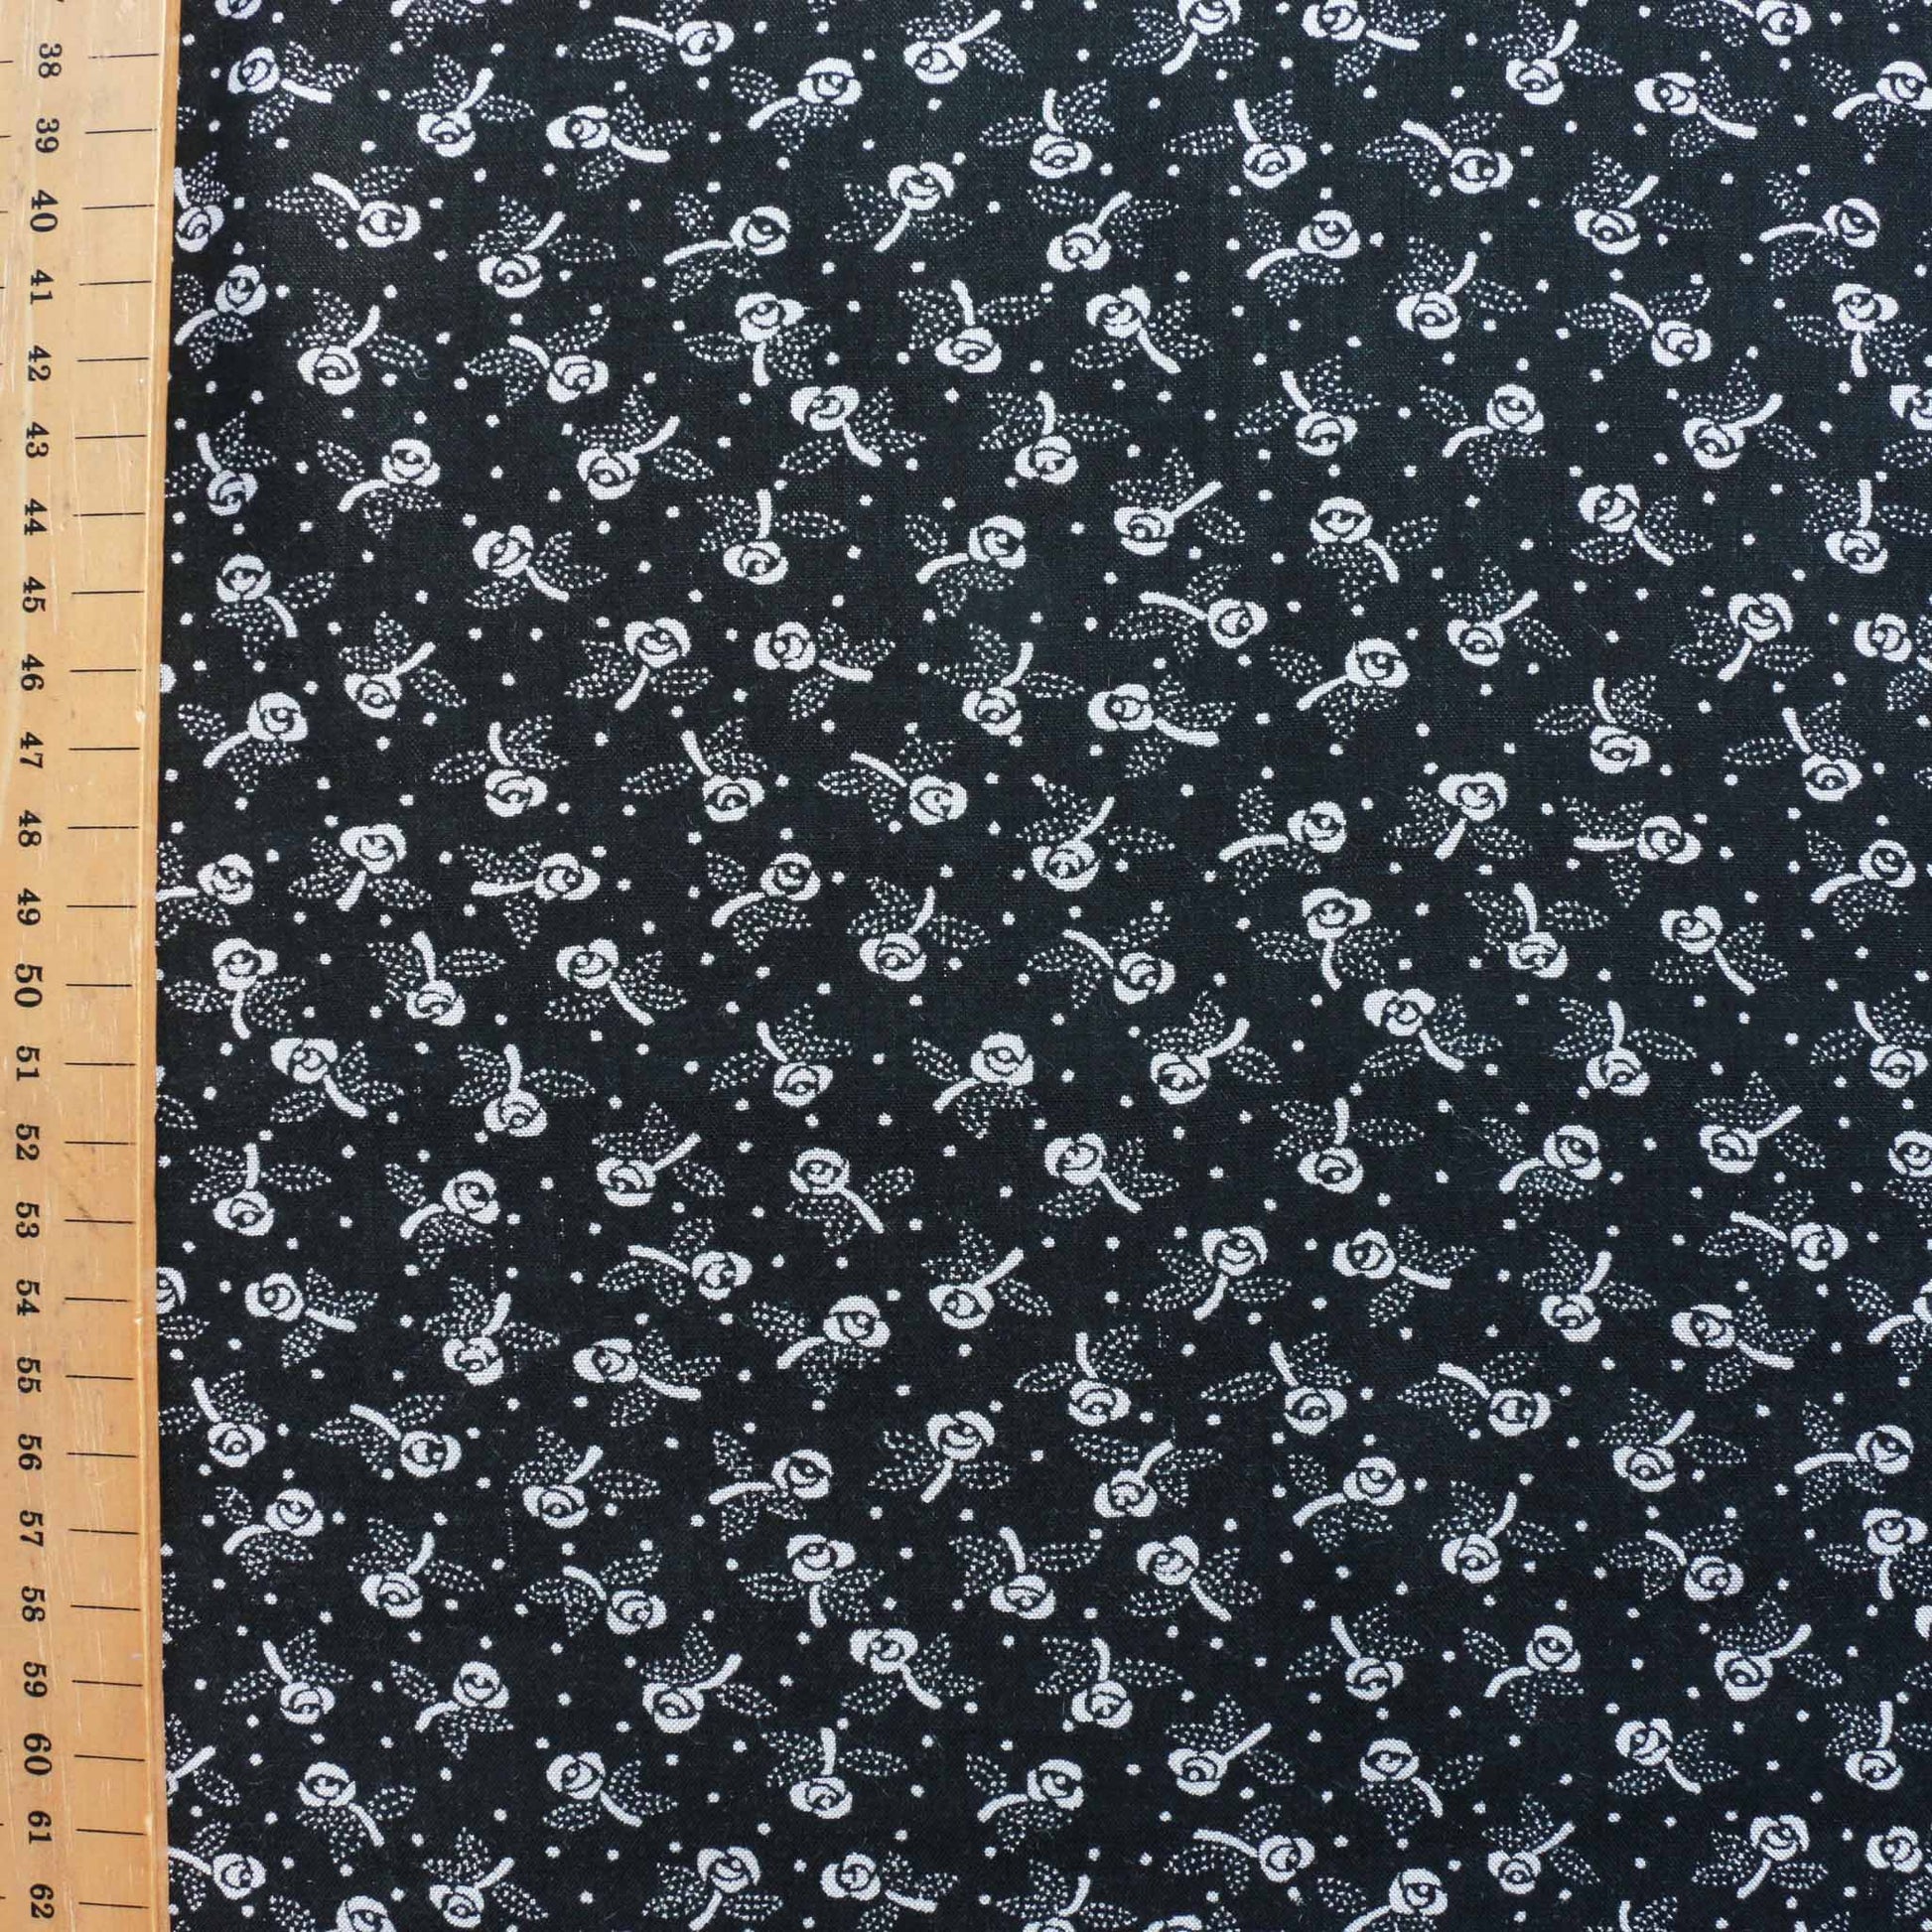 metre rose printed black viscose voile dressmaking fabric with white detail